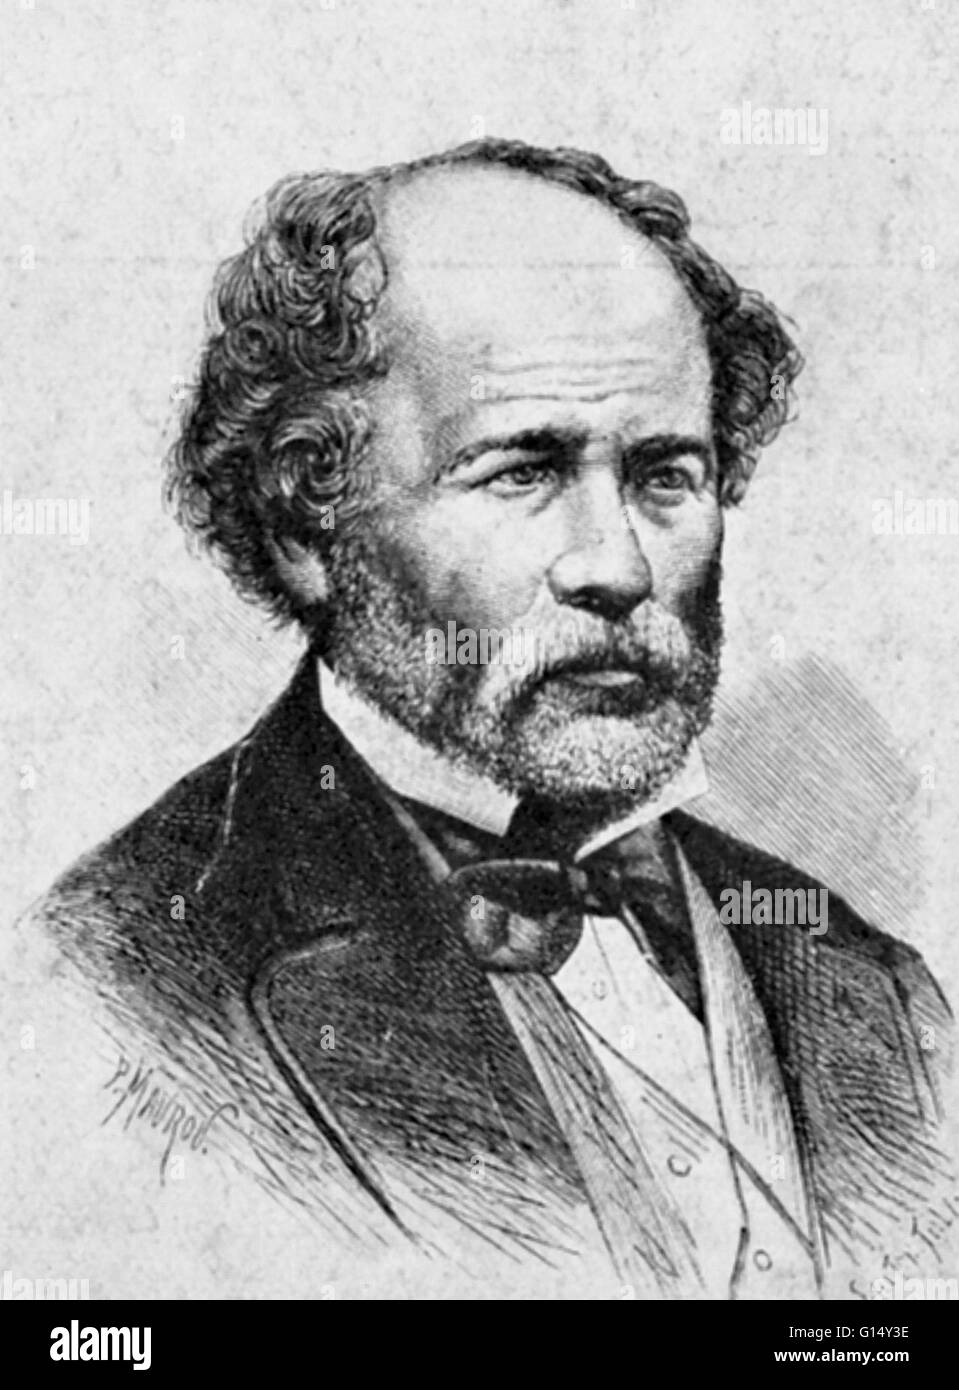 Matthew Fontaine Maury ((January 14, 1806 - February 1, 1873) was an American astronomer, historian, oceanographer, meteorologist, cartographer, author, geologist, and educator. He was nicknamed 'Pathfinder of the Seas' and 'Father of Modern Oceanography Stock Photo